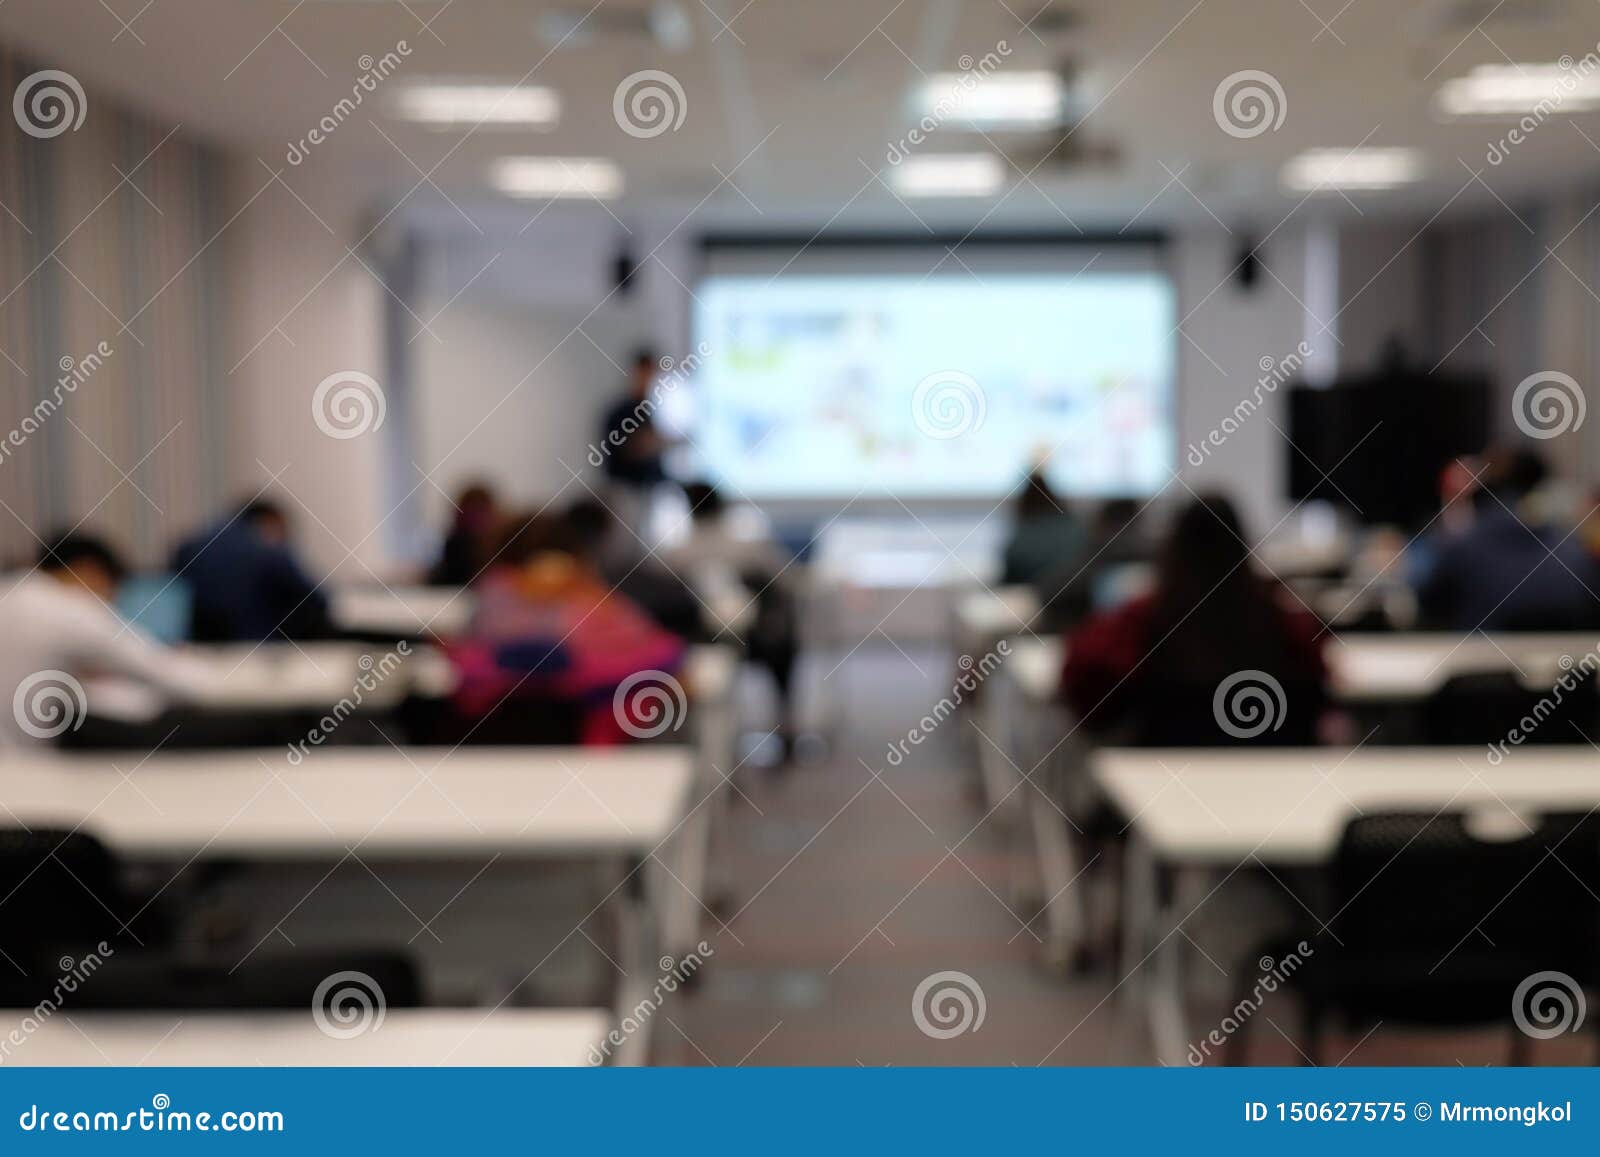 blurry image of seminar in classroom